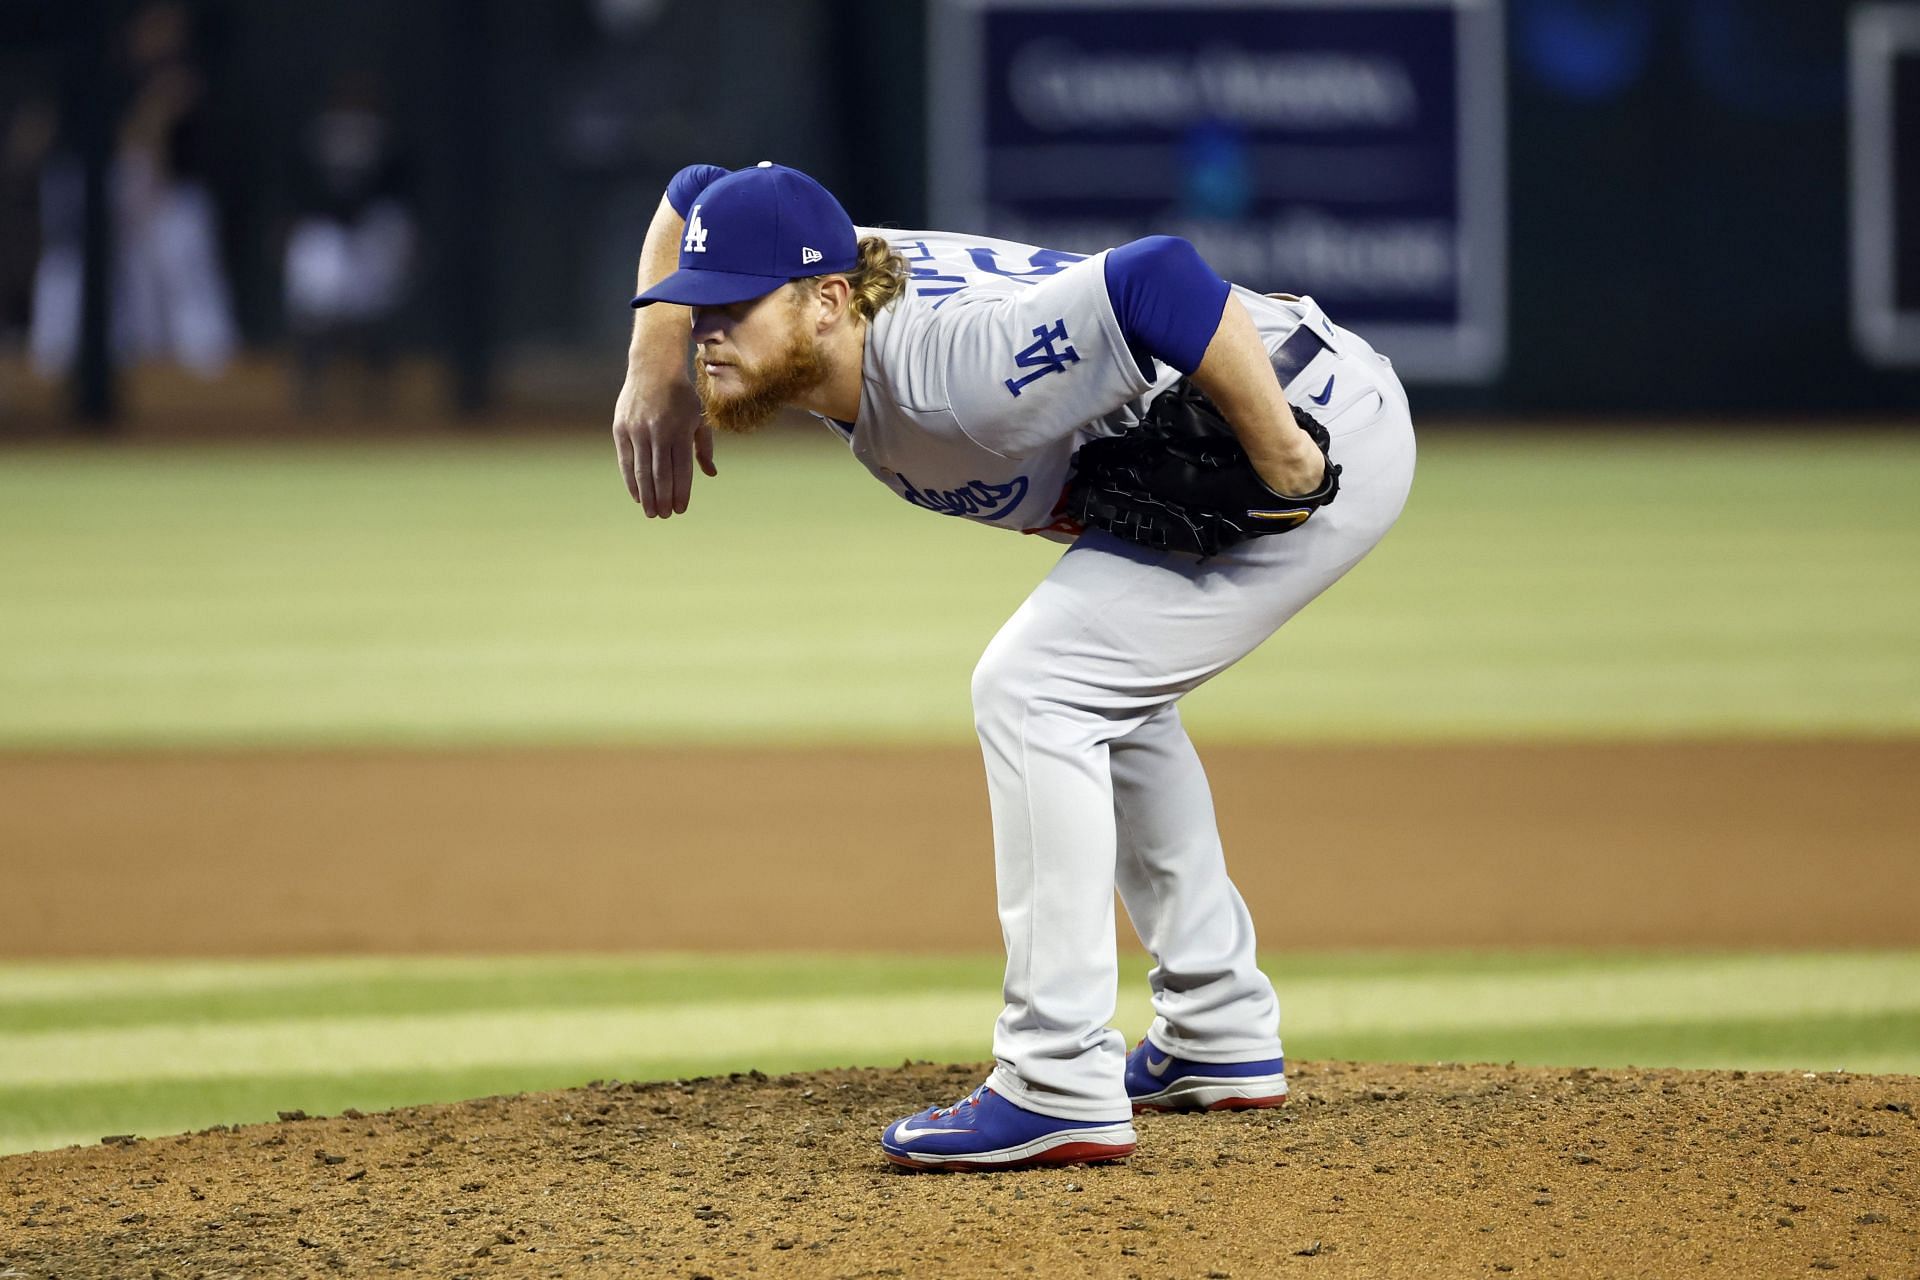 Kimbrel's unique stance mocked by Phillies fans